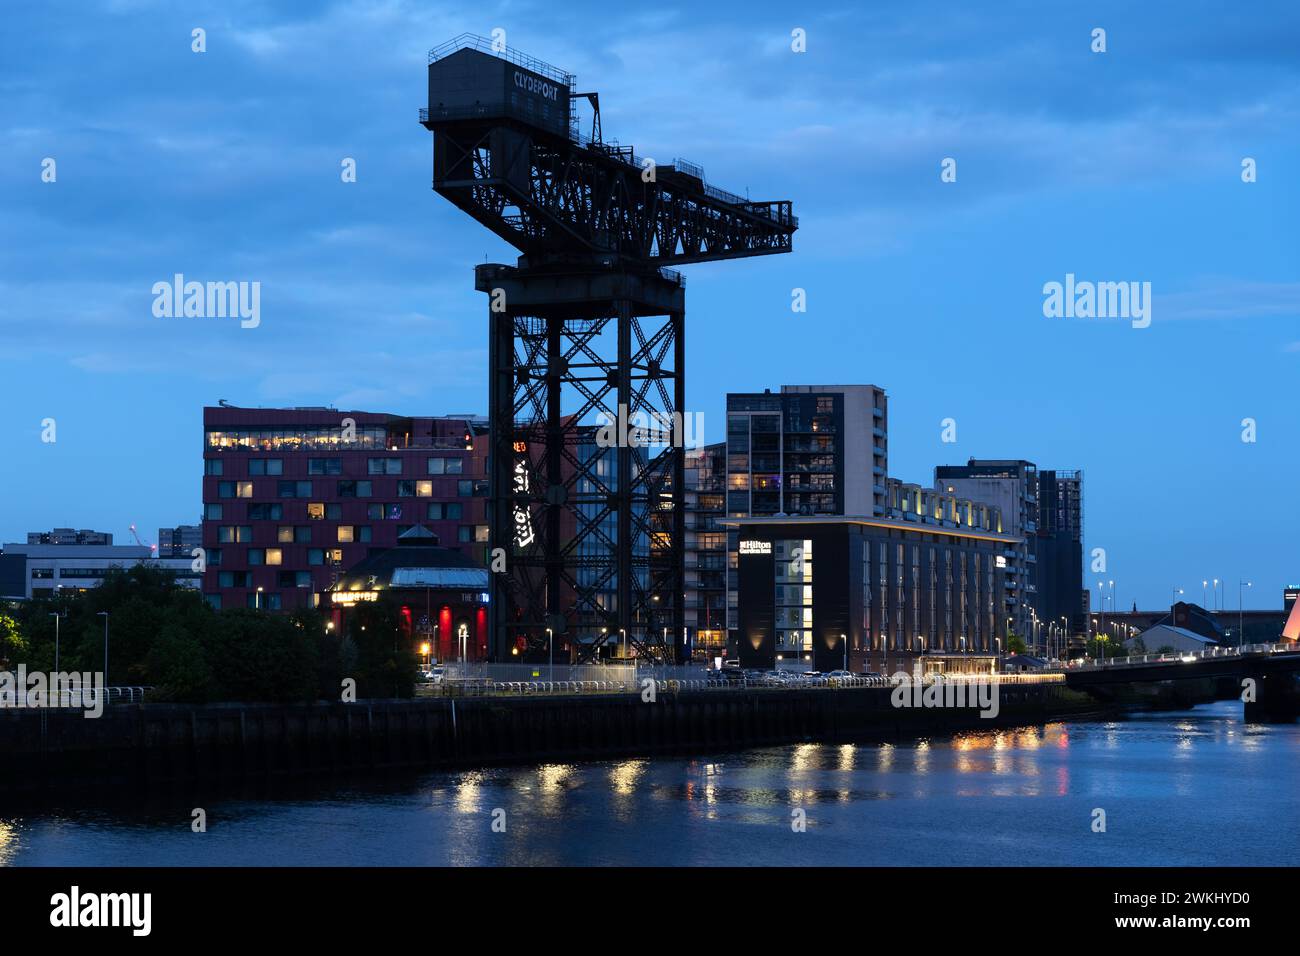 Evening at the Finnieston Crane at River Clyde in city of Glasgow, Scotland, UK, disused cantilever crane from 1931. Stock Photo